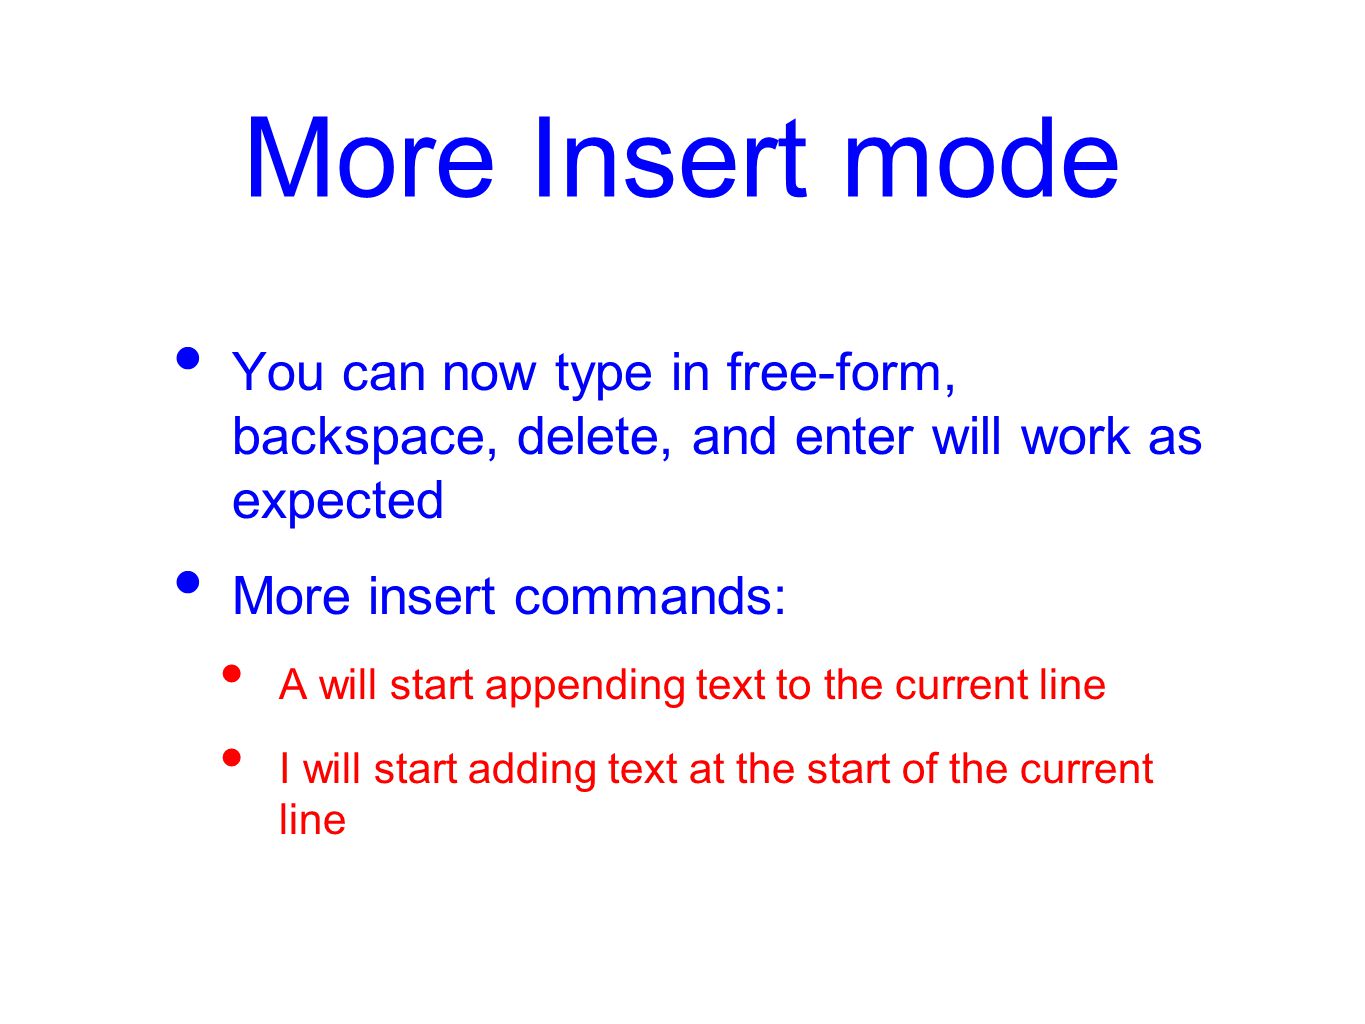 More Insert mode You can now type in free-form, backspace, delete, and enter will work as expected More insert commands: A will start appending text to the current line I will start adding text at the start of the current line